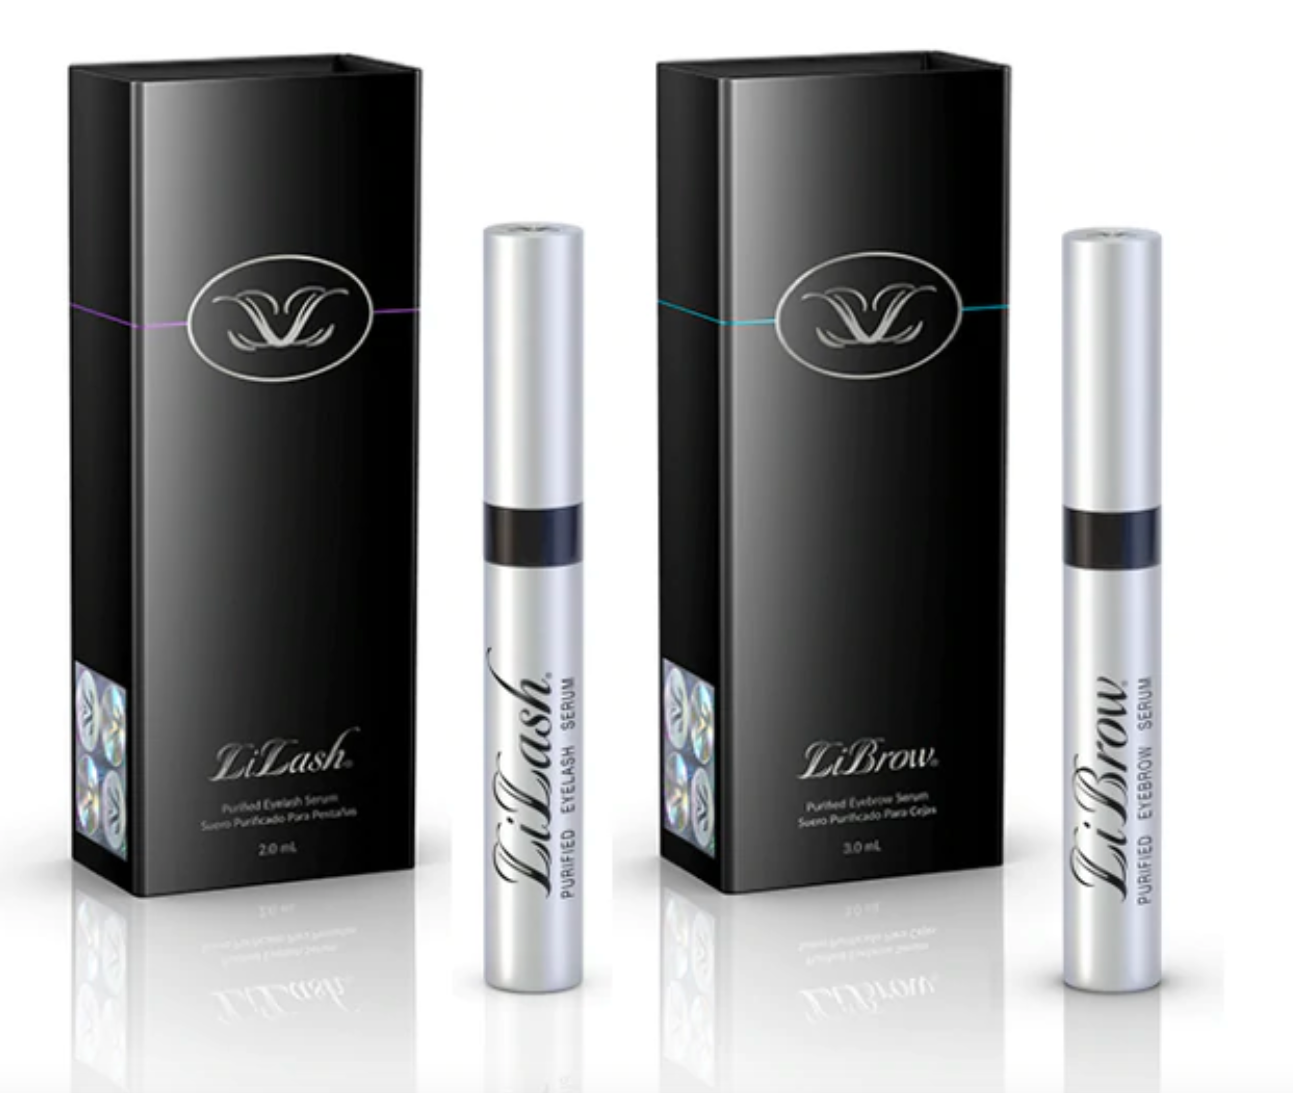 LILASH 4ml & LIBROW 3ml Gift Pack